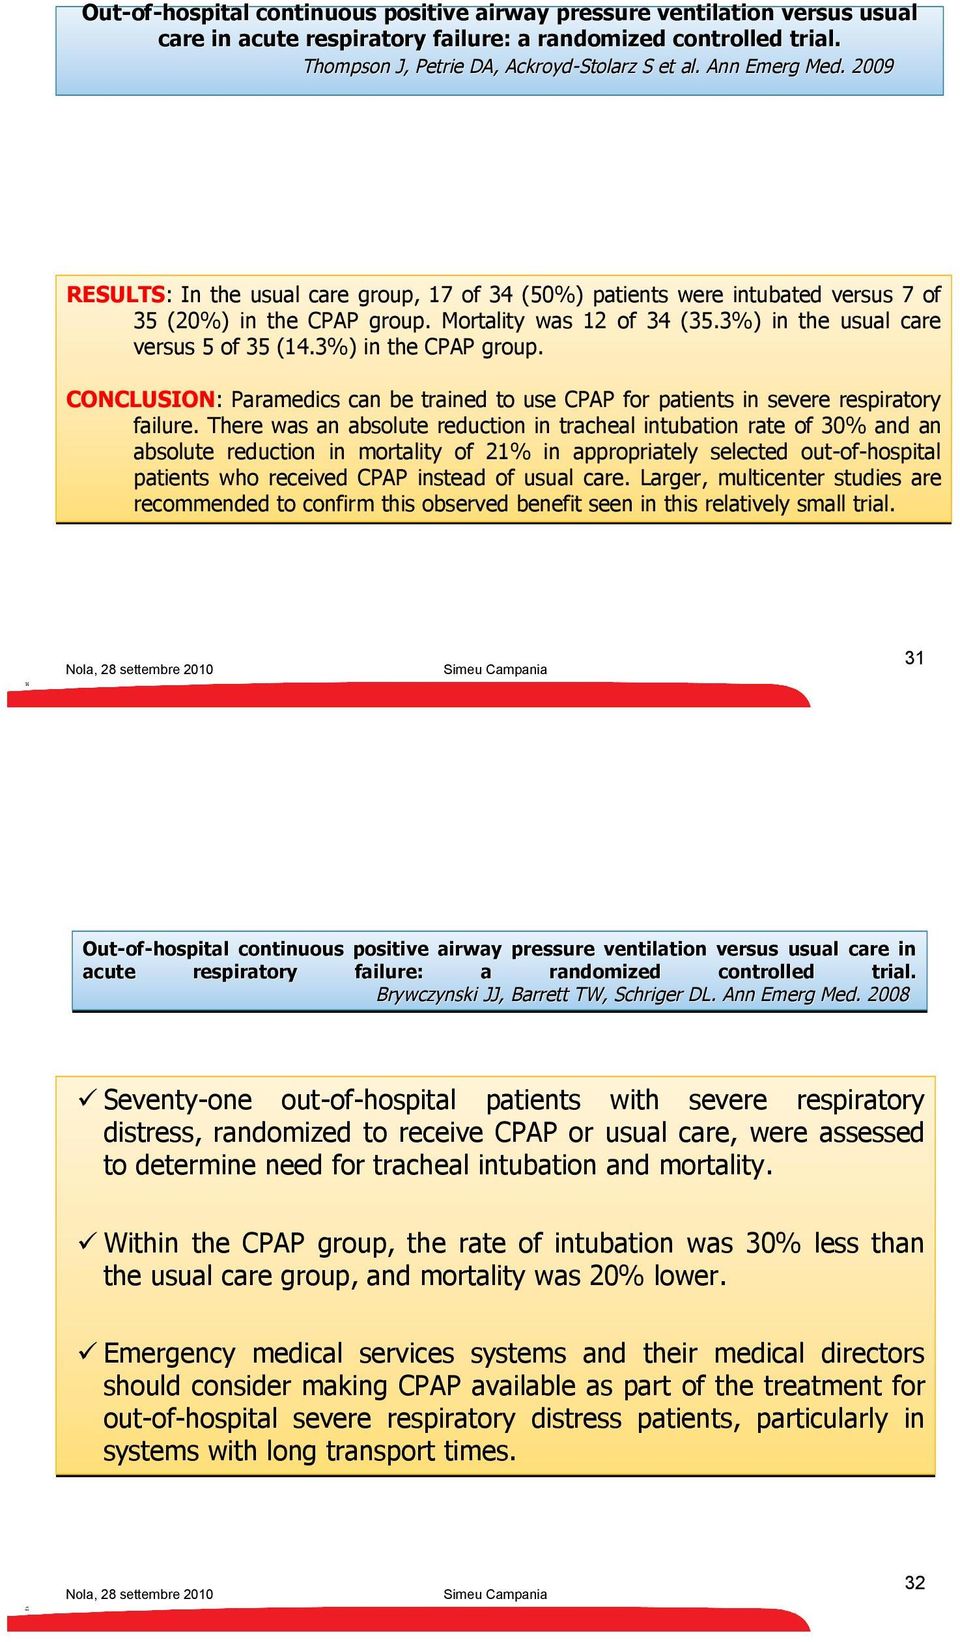 Med. 2009 Ackroyd-Stolarz RESULTS: In the usual care group, 17 of 34 (50%) patients were intubated versus 7 of 35 (20%) in the CPAP group. Mortality was 12 of 34 (35.